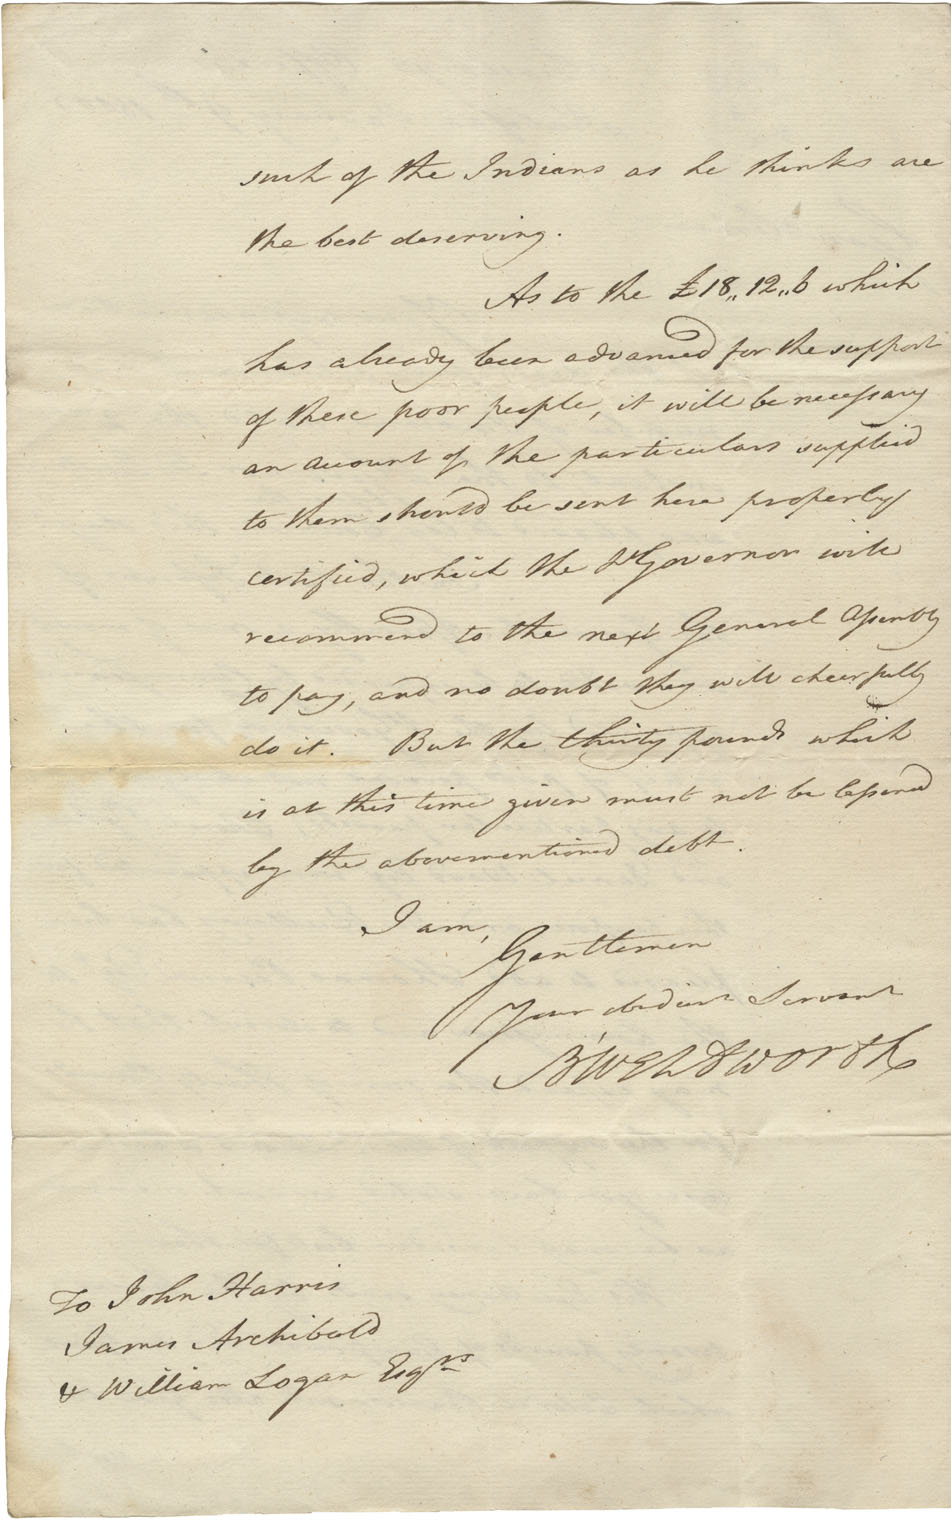 Letter of Sir John Wentworth informing John Harris, James Archibald and William Logan of the appointment of Col. Pearson and steps taken to relieve the Mi'kmaq. 